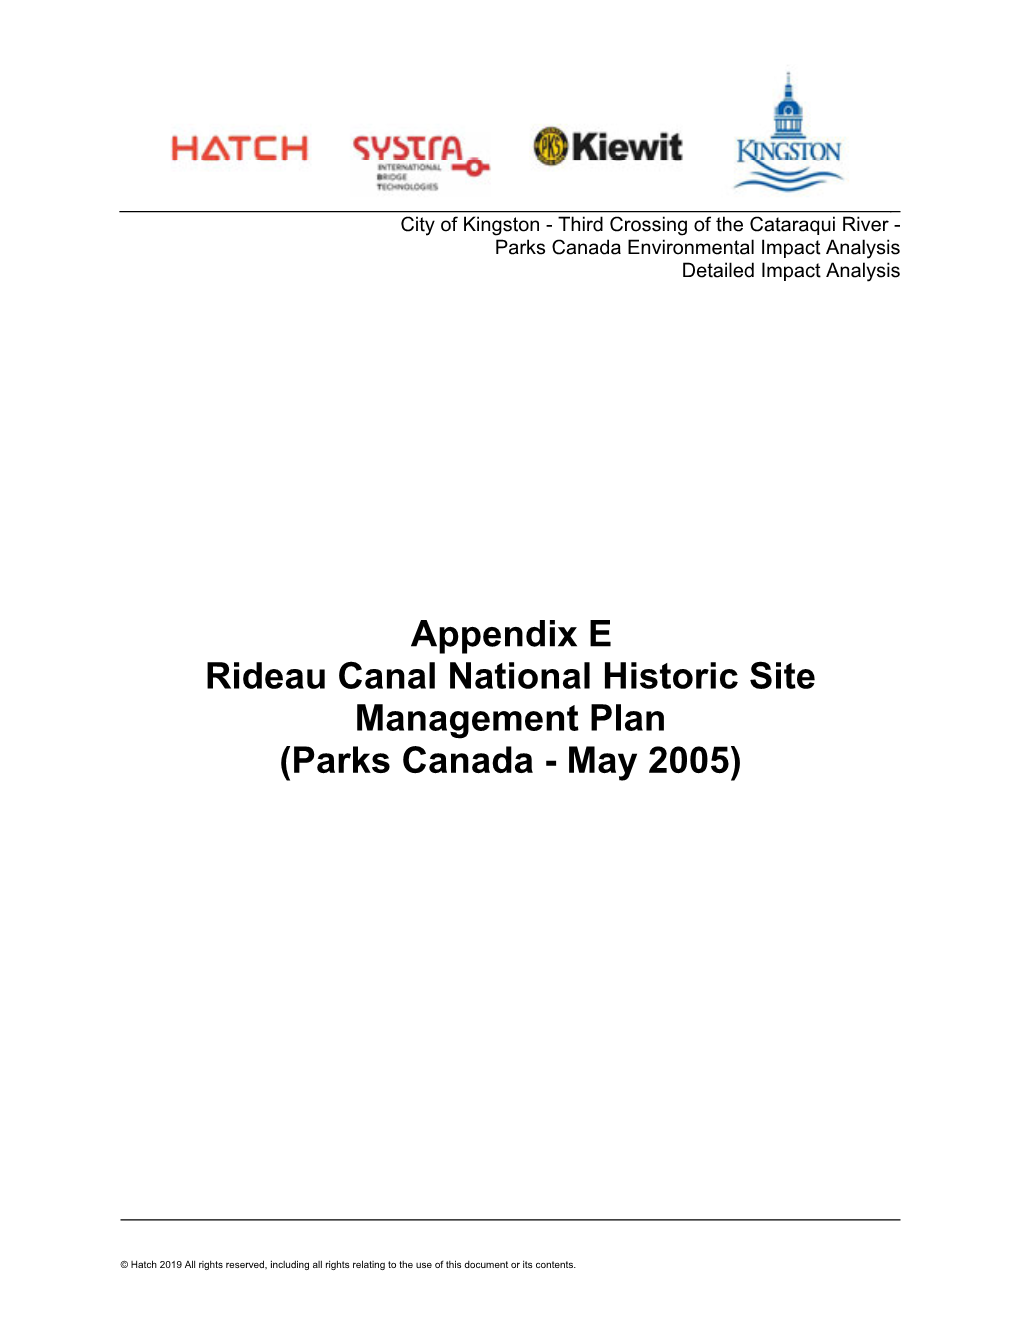 Rideau Canal National Historic Site Management Plan (Parks Canada - May 2005)